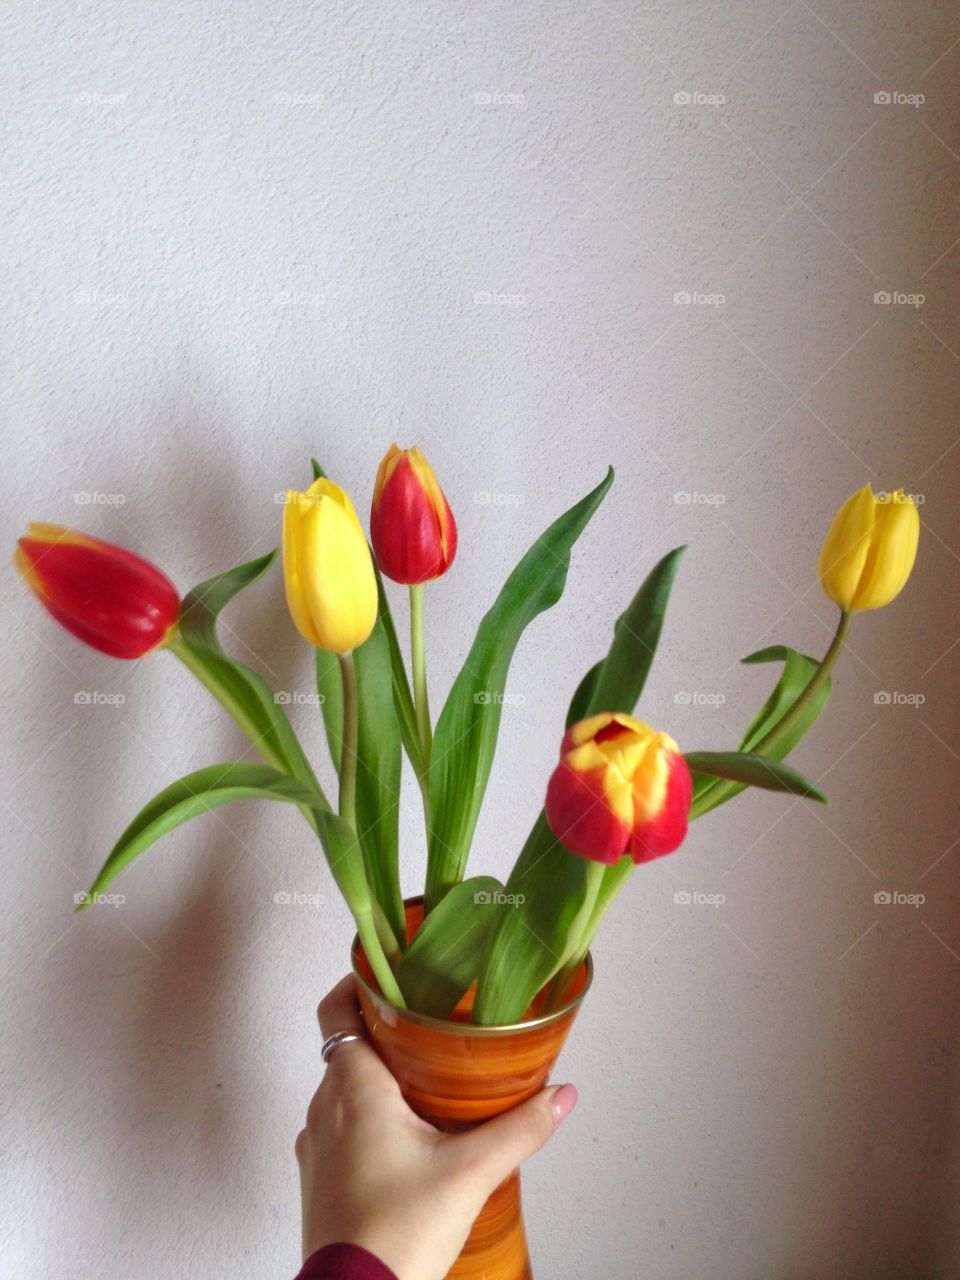 Woman's hand holding tulip flowers in vase